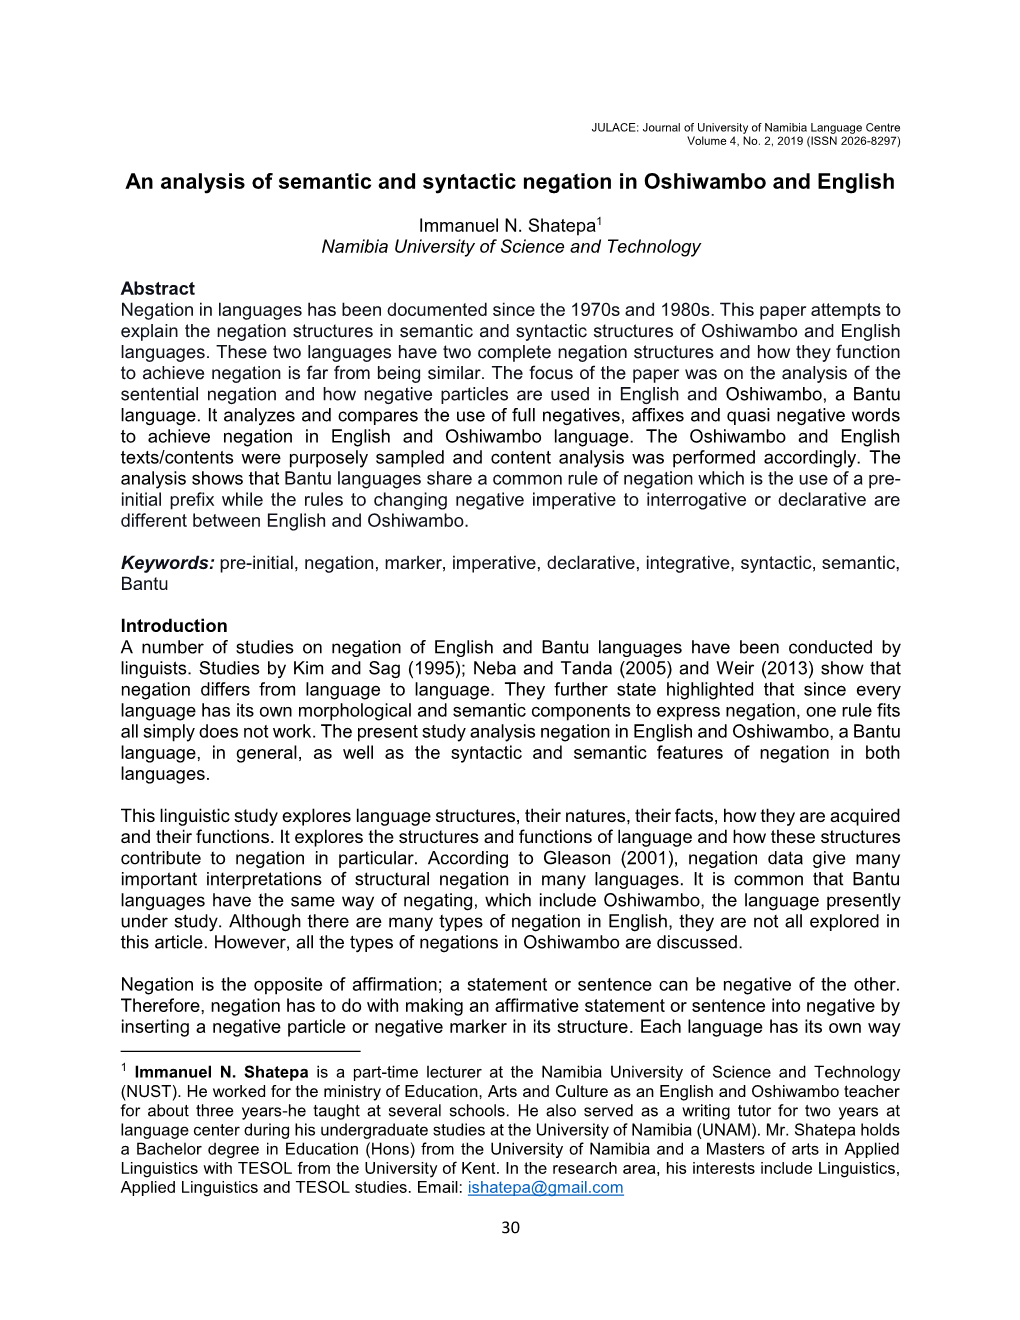 An Analysis of Semantic and Syntactic Negation in Oshiwambo and English